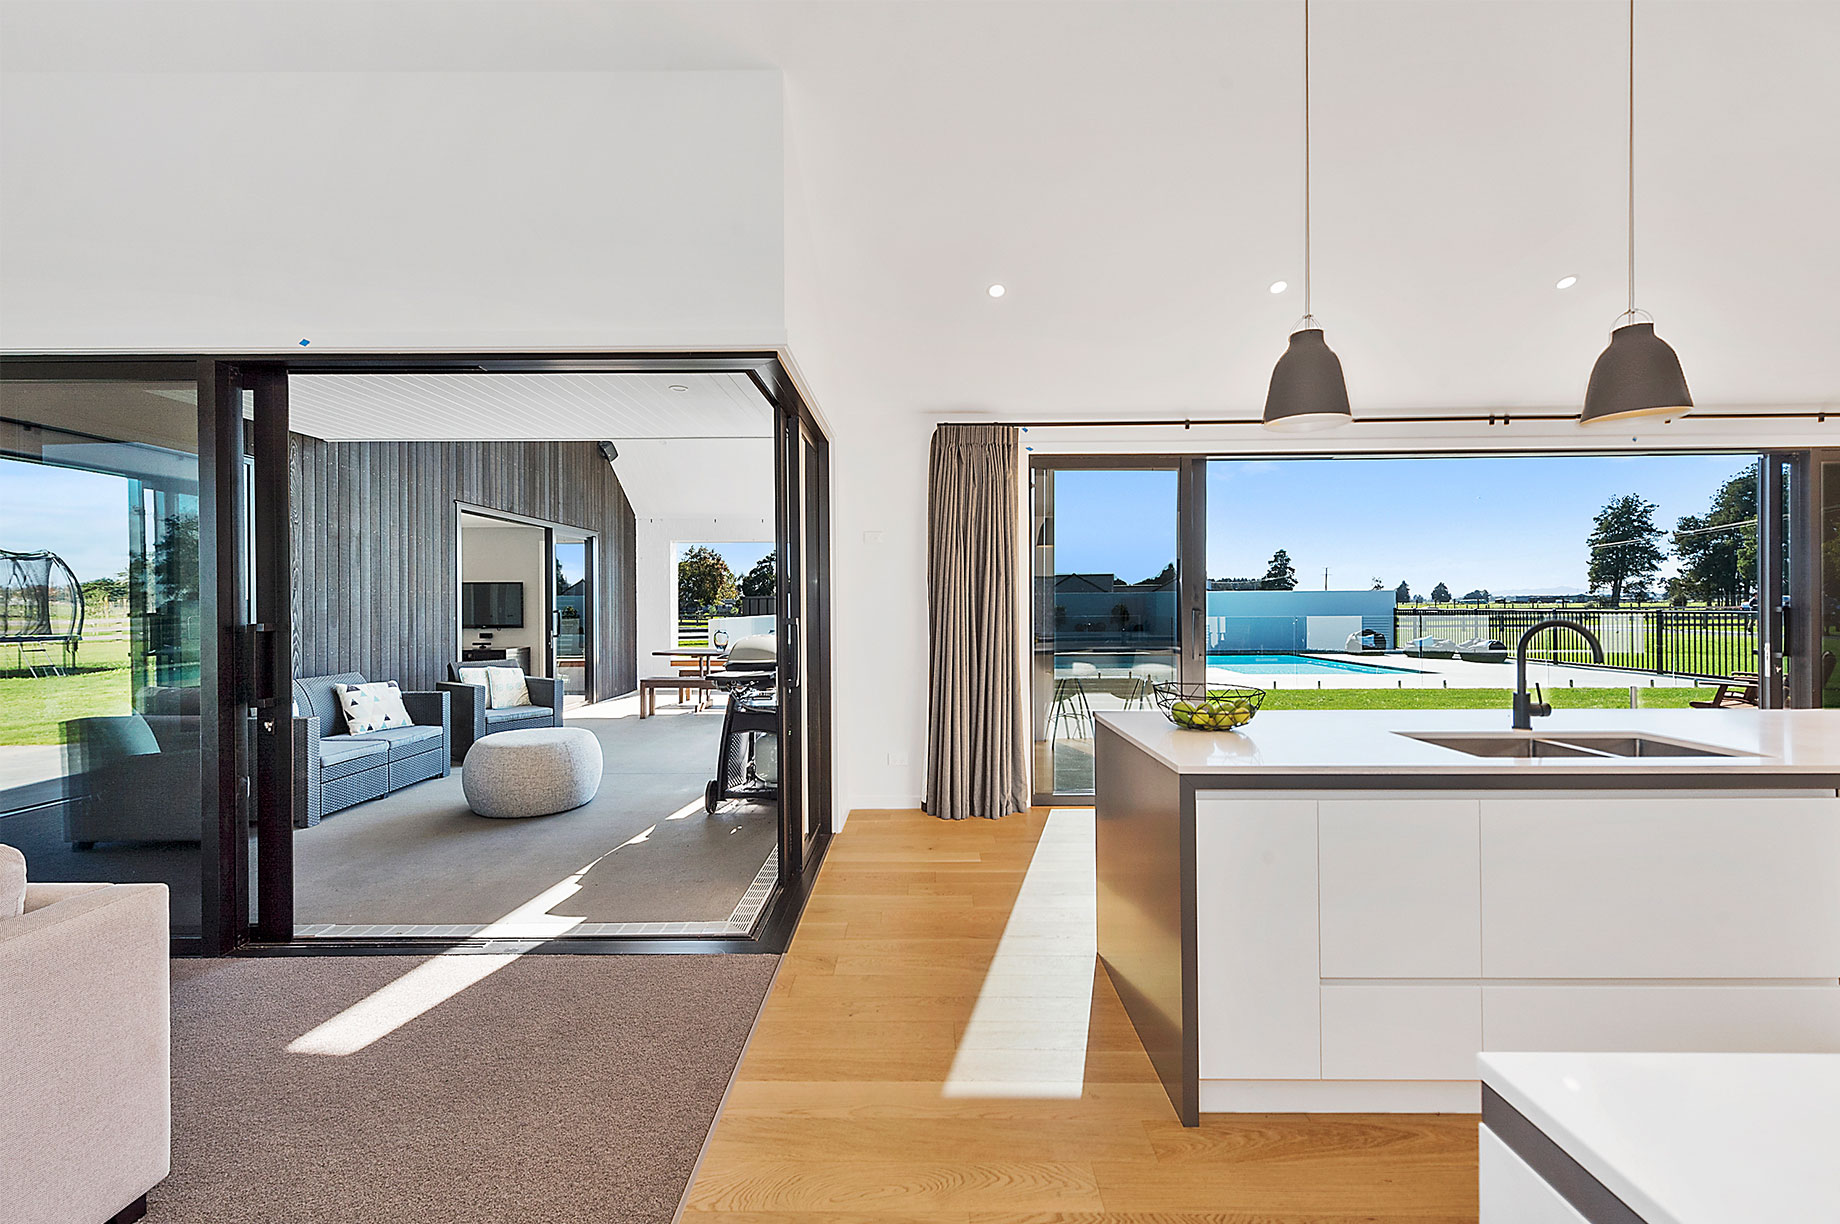 White kitchen interior with a view of the outdoor pool